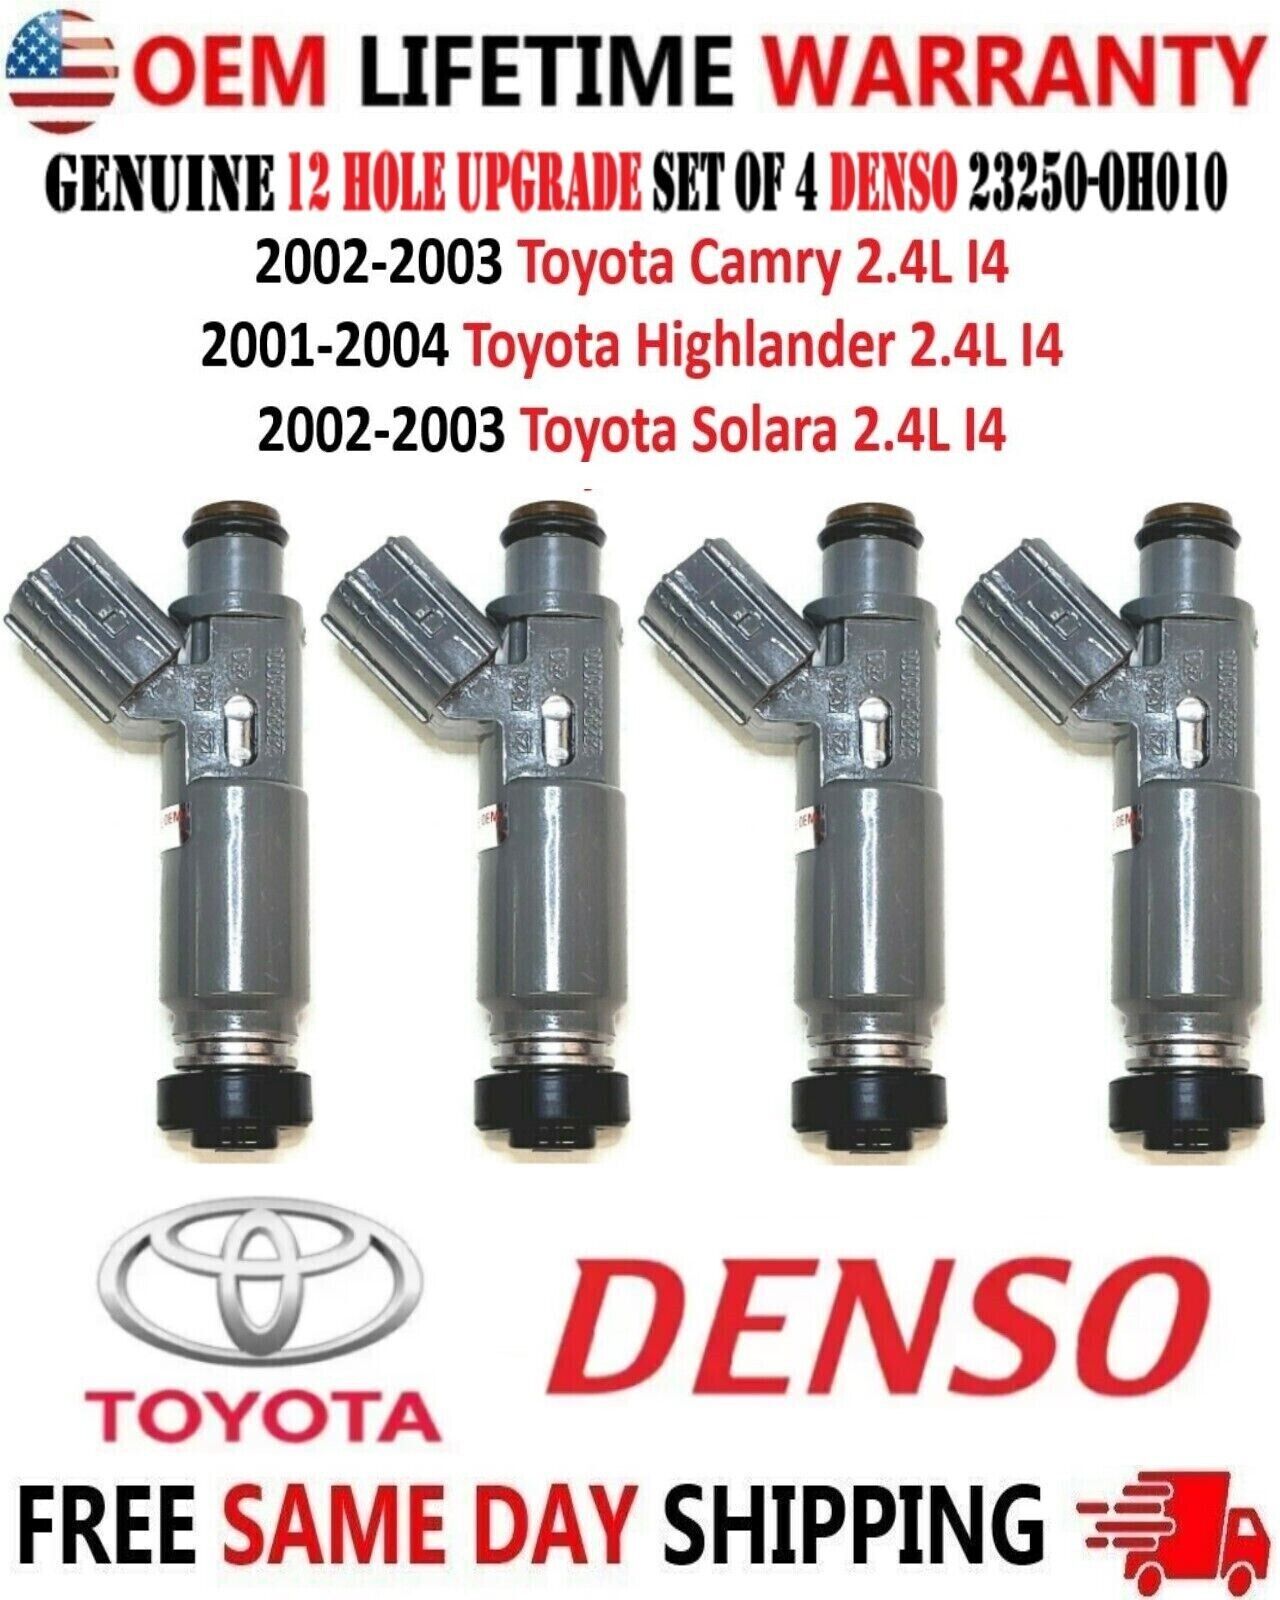 Genuine DENSO 12 Hole Upgrade x4 injectors for 2001-2004 Toyota #23250-0H010